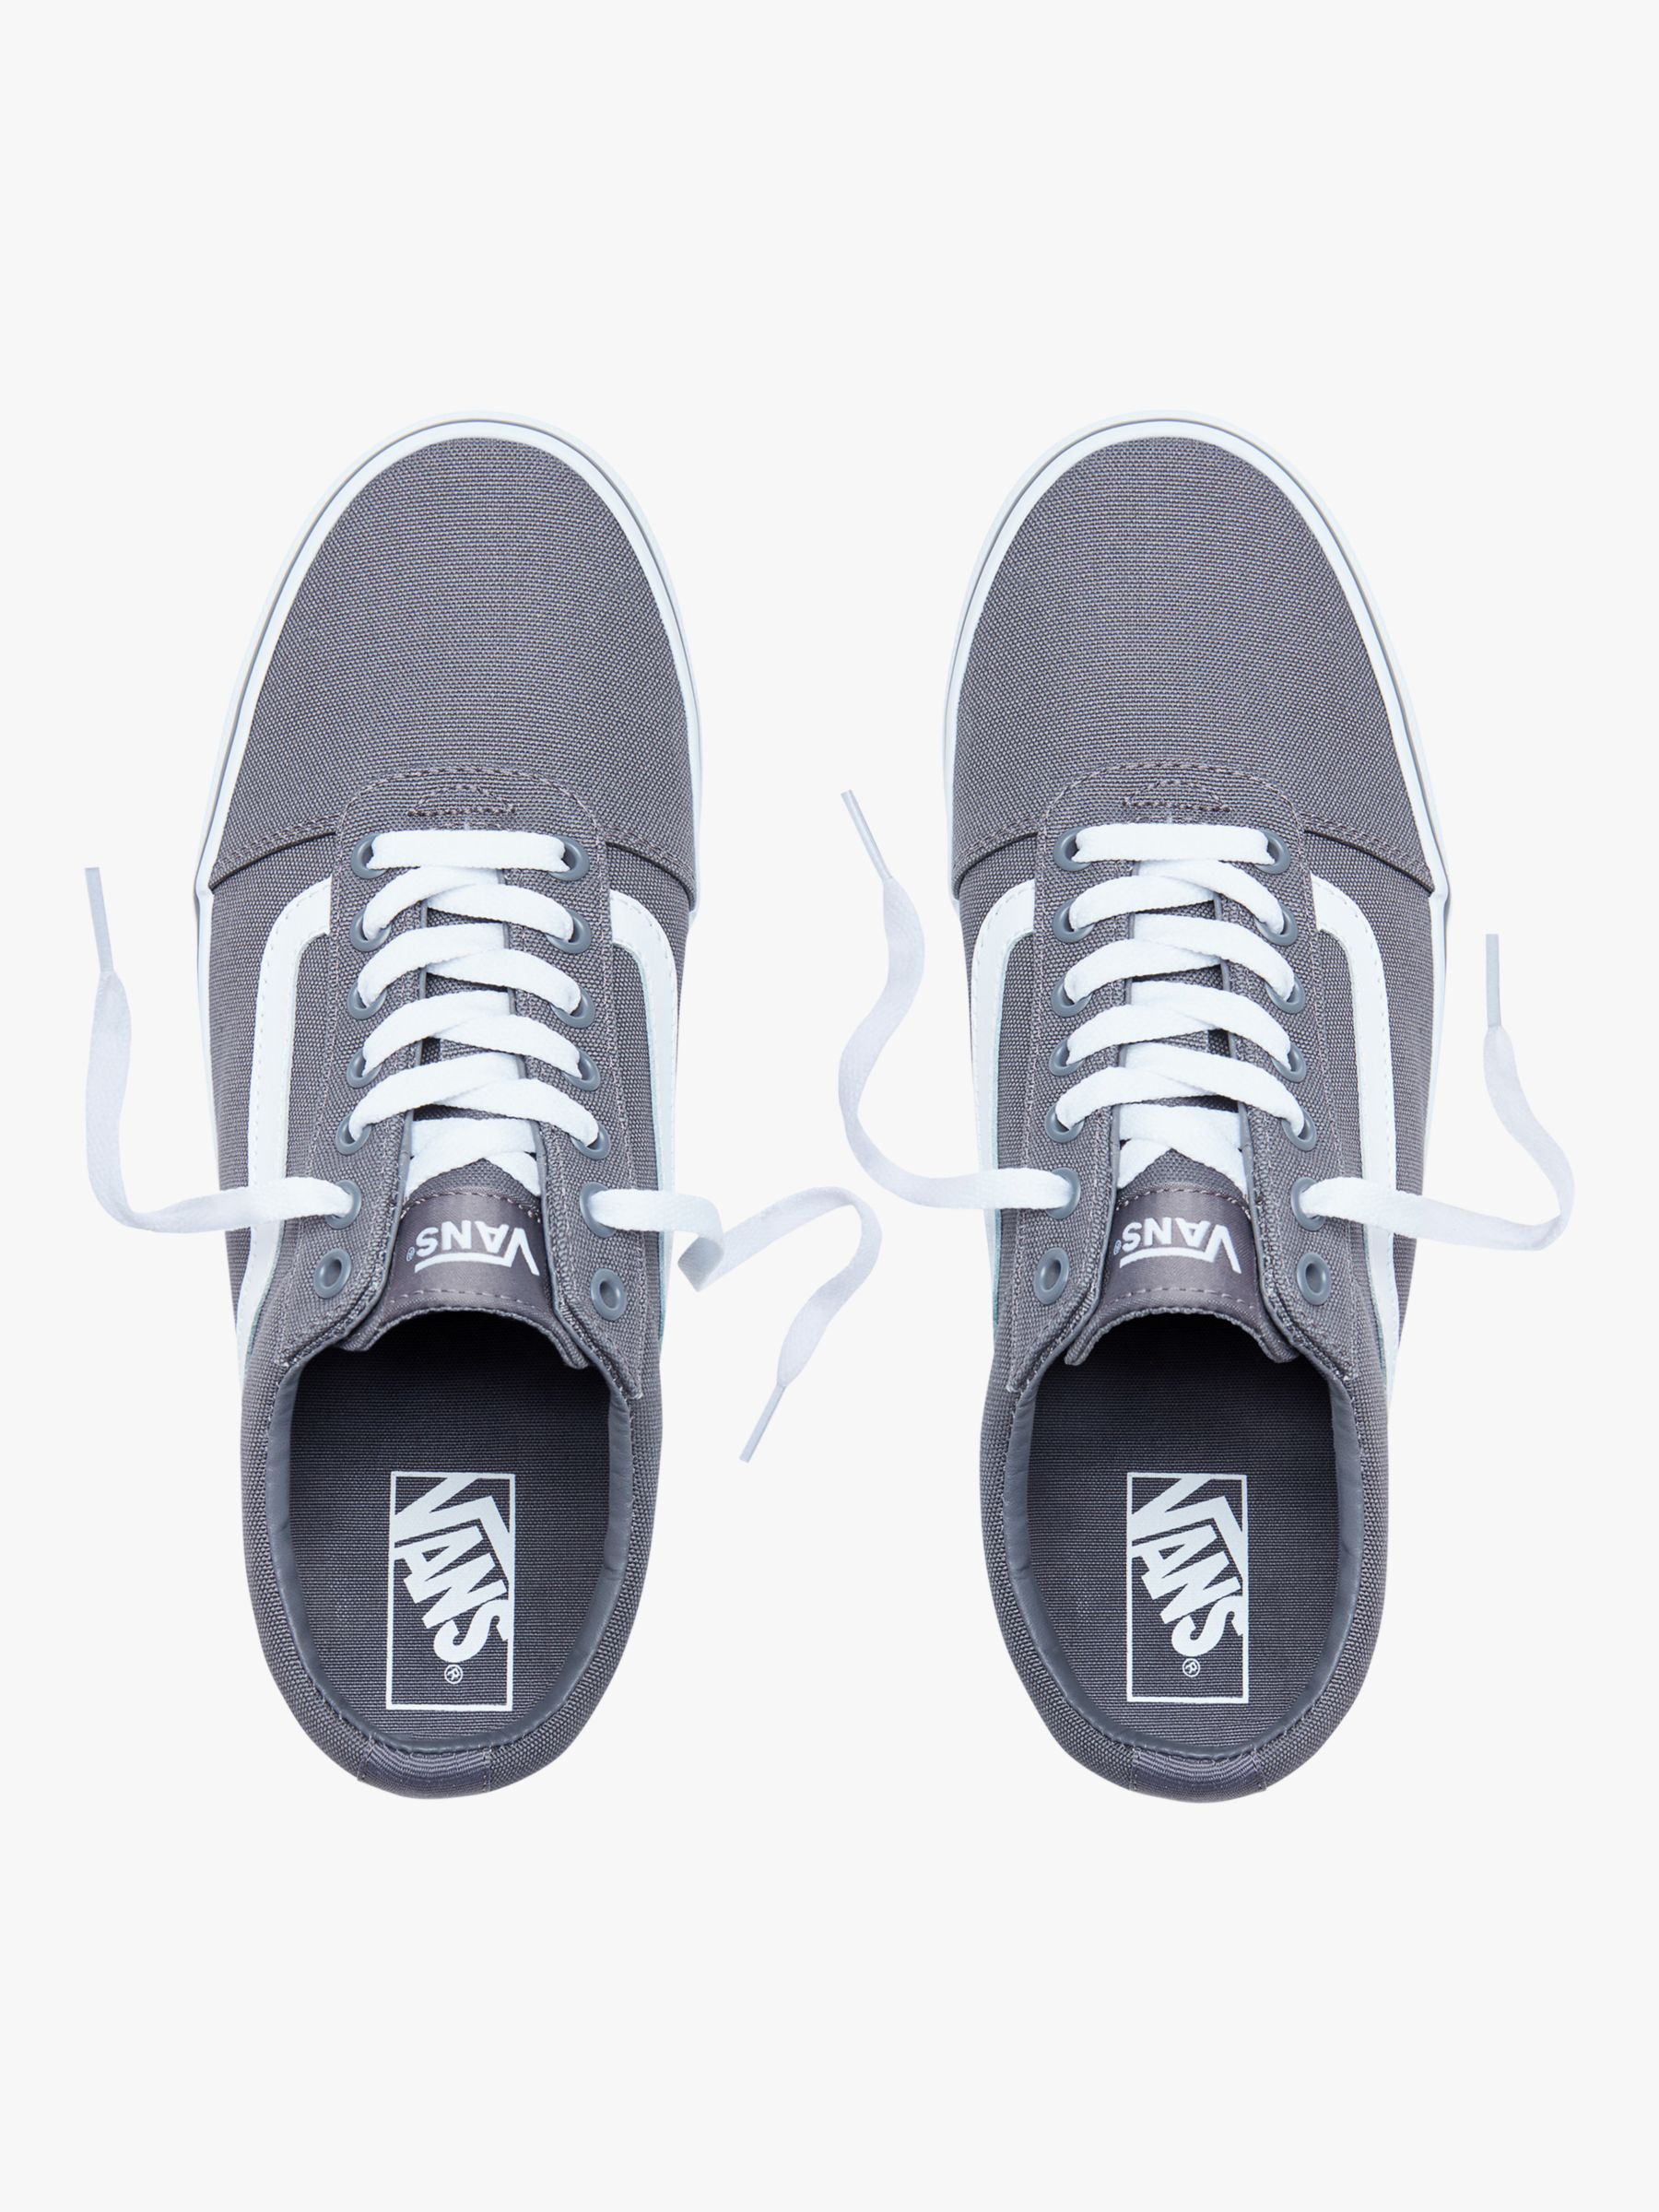 Vans Ward Trainers, Pewter/White at 